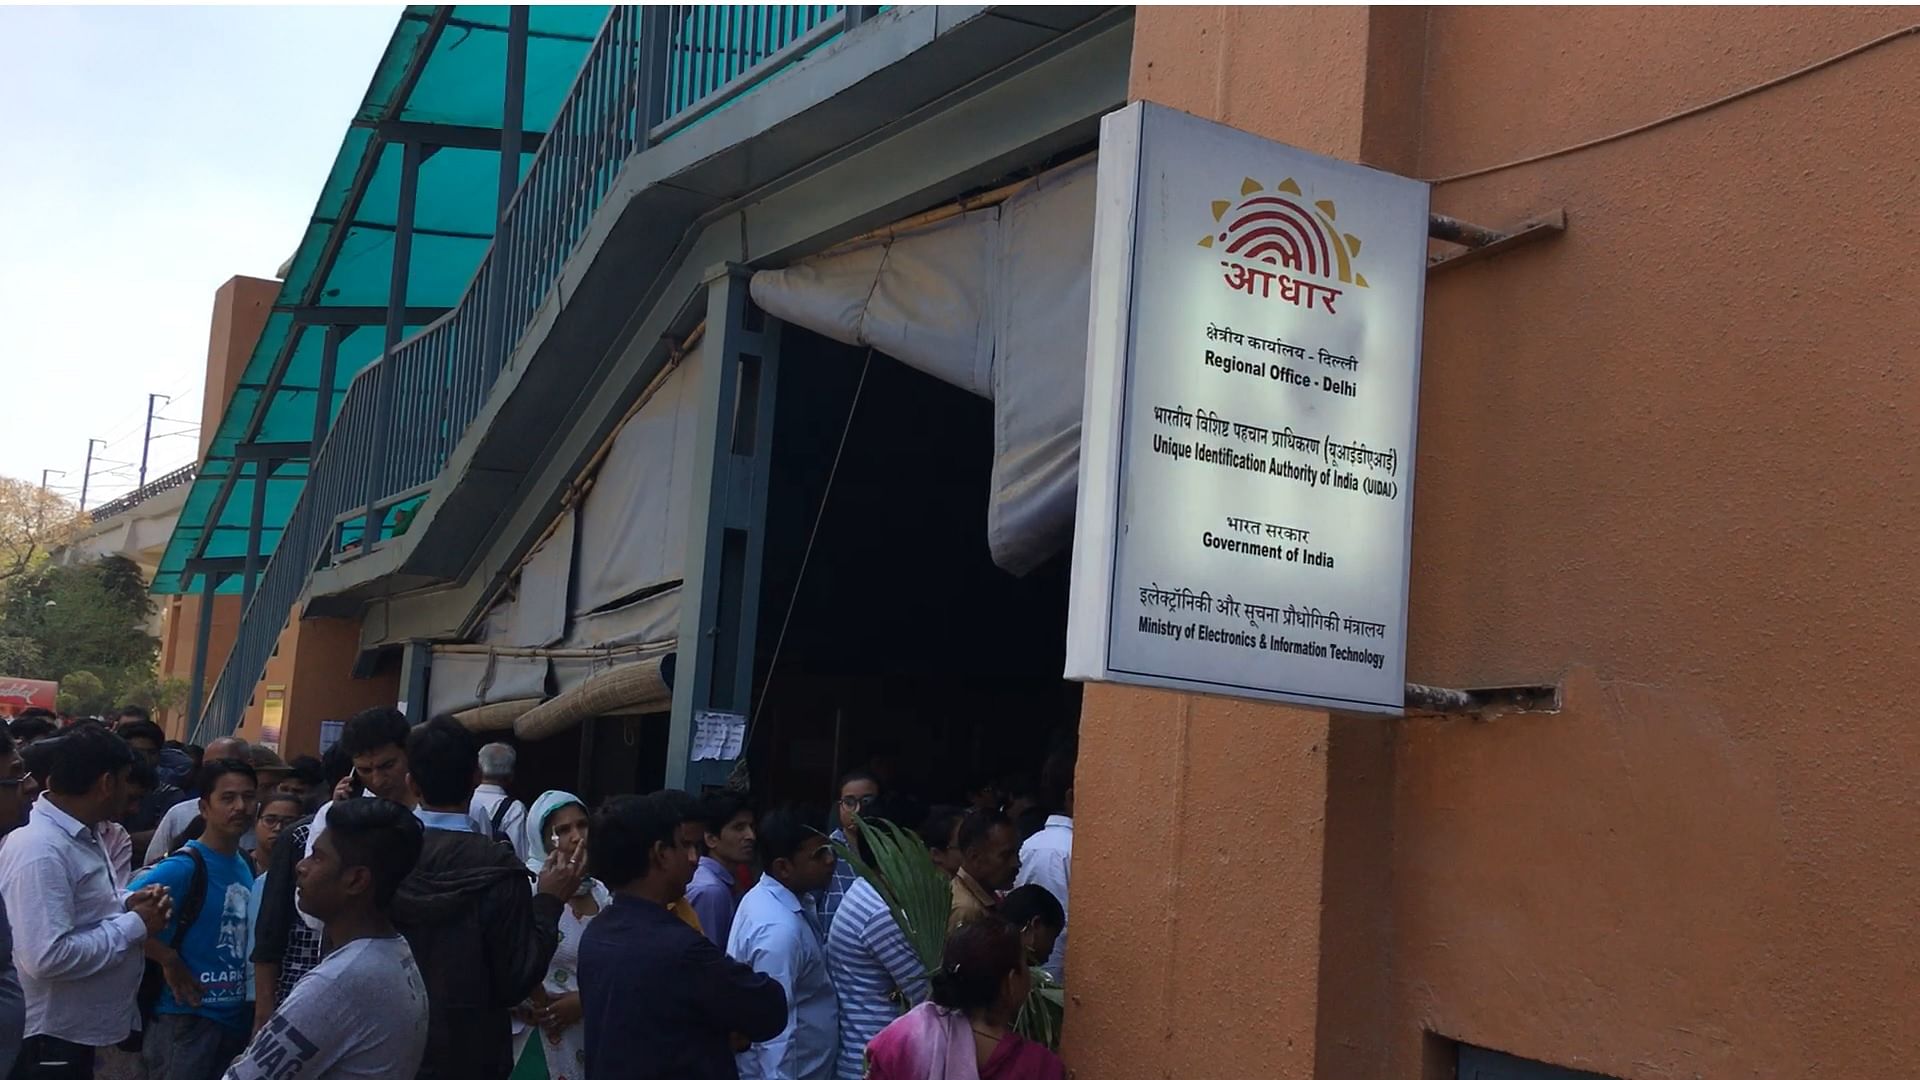 The crowd swells outside the Regional Aadhaar Center at Paragati Maidan Metro Station in New Delhi